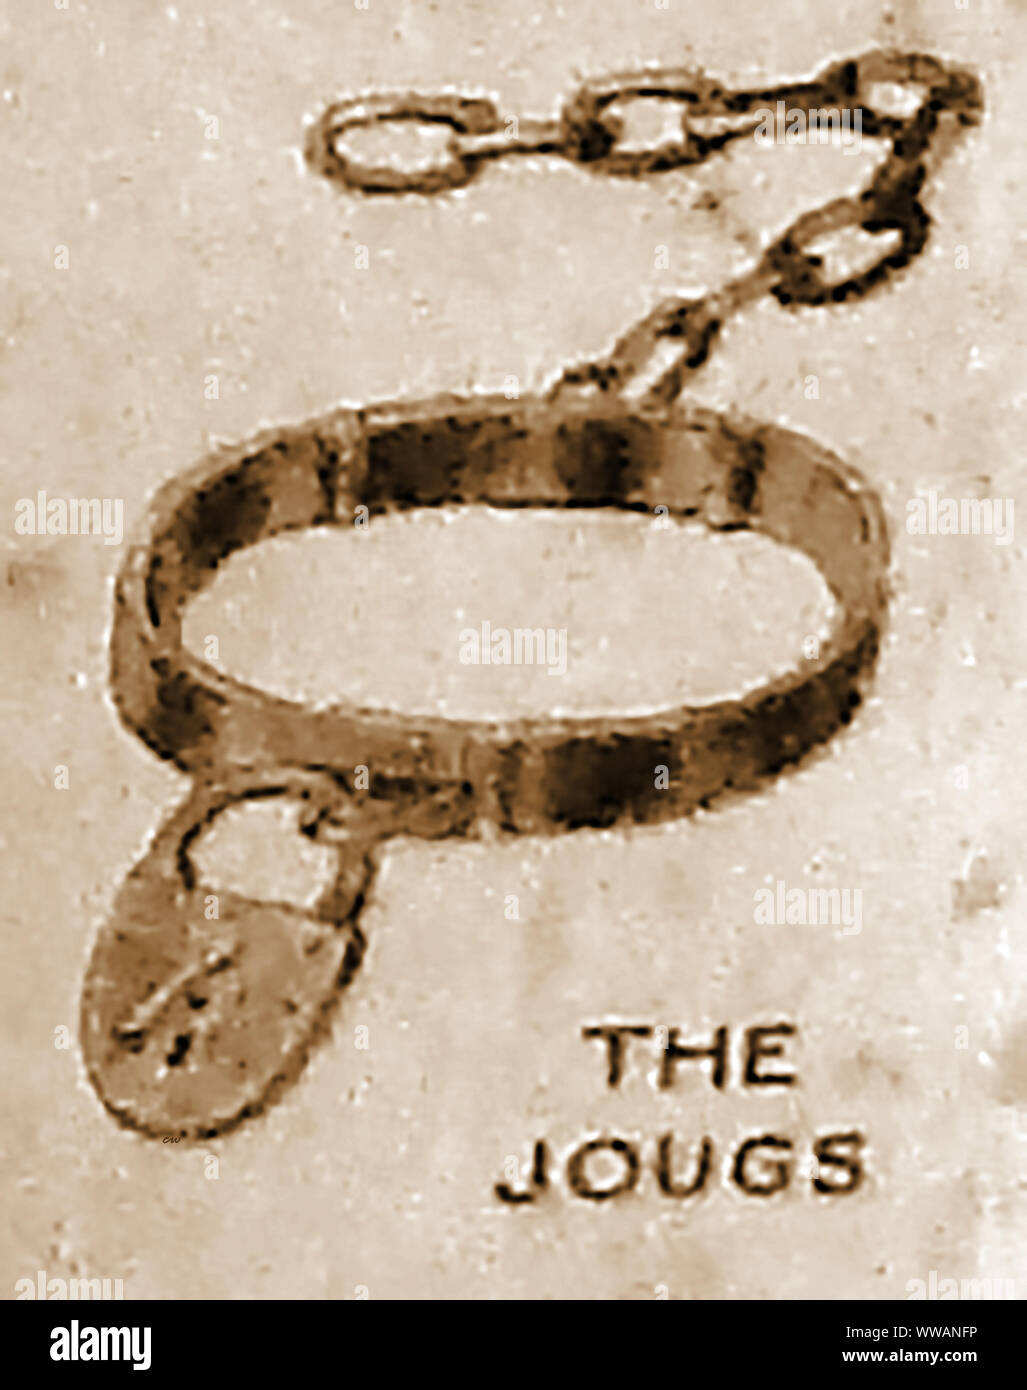 PUNISHMENTS & INSTRUMENTS OF TORTURE FROM THE PAST - Thew Jougs,  Juggs, or Joggs, a locked collar  with a short chain for attaching a petty prisoner to a tree, boat interior etc. Sometimes used for slaves and used in Scotland in place of a public pillory for humiliation of an offender. Stock Photo